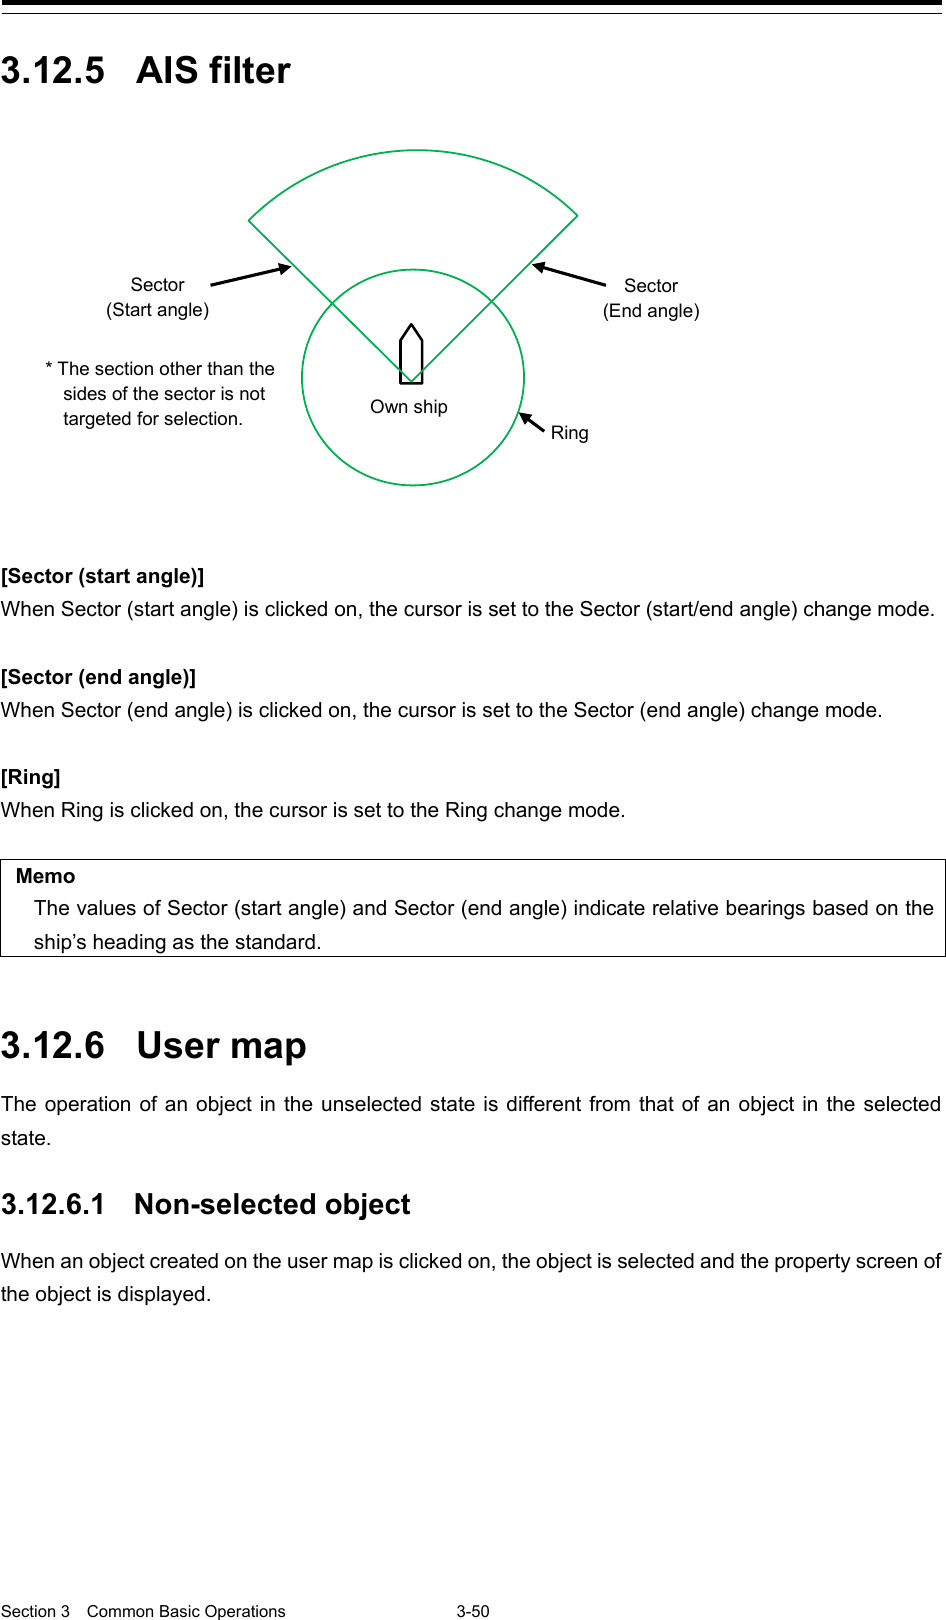  Section 3  Common Basic Operations  3-50  3.12.5 AIS filter   [Sector (start angle)] When Sector (start angle) is clicked on, the cursor is set to the Sector (start/end angle) change mode.  [Sector (end angle)] When Sector (end angle) is clicked on, the cursor is set to the Sector (end angle) change mode.  [Ring] When Ring is clicked on, the cursor is set to the Ring change mode.  Memo The values of Sector (start angle) and Sector (end angle) indicate relative bearings based on the ship’s heading as the standard.   3.12.6 User map The operation of an object in the unselected state is different from that of an object in the selected state.  3.12.6.1 Non-selected object When an object created on the user map is clicked on, the object is selected and the property screen of the object is displayed.     Sector (Start angle) Ring Own ship Sector (End angle) * The section other than the sides of the sector is not targeted for selection. 